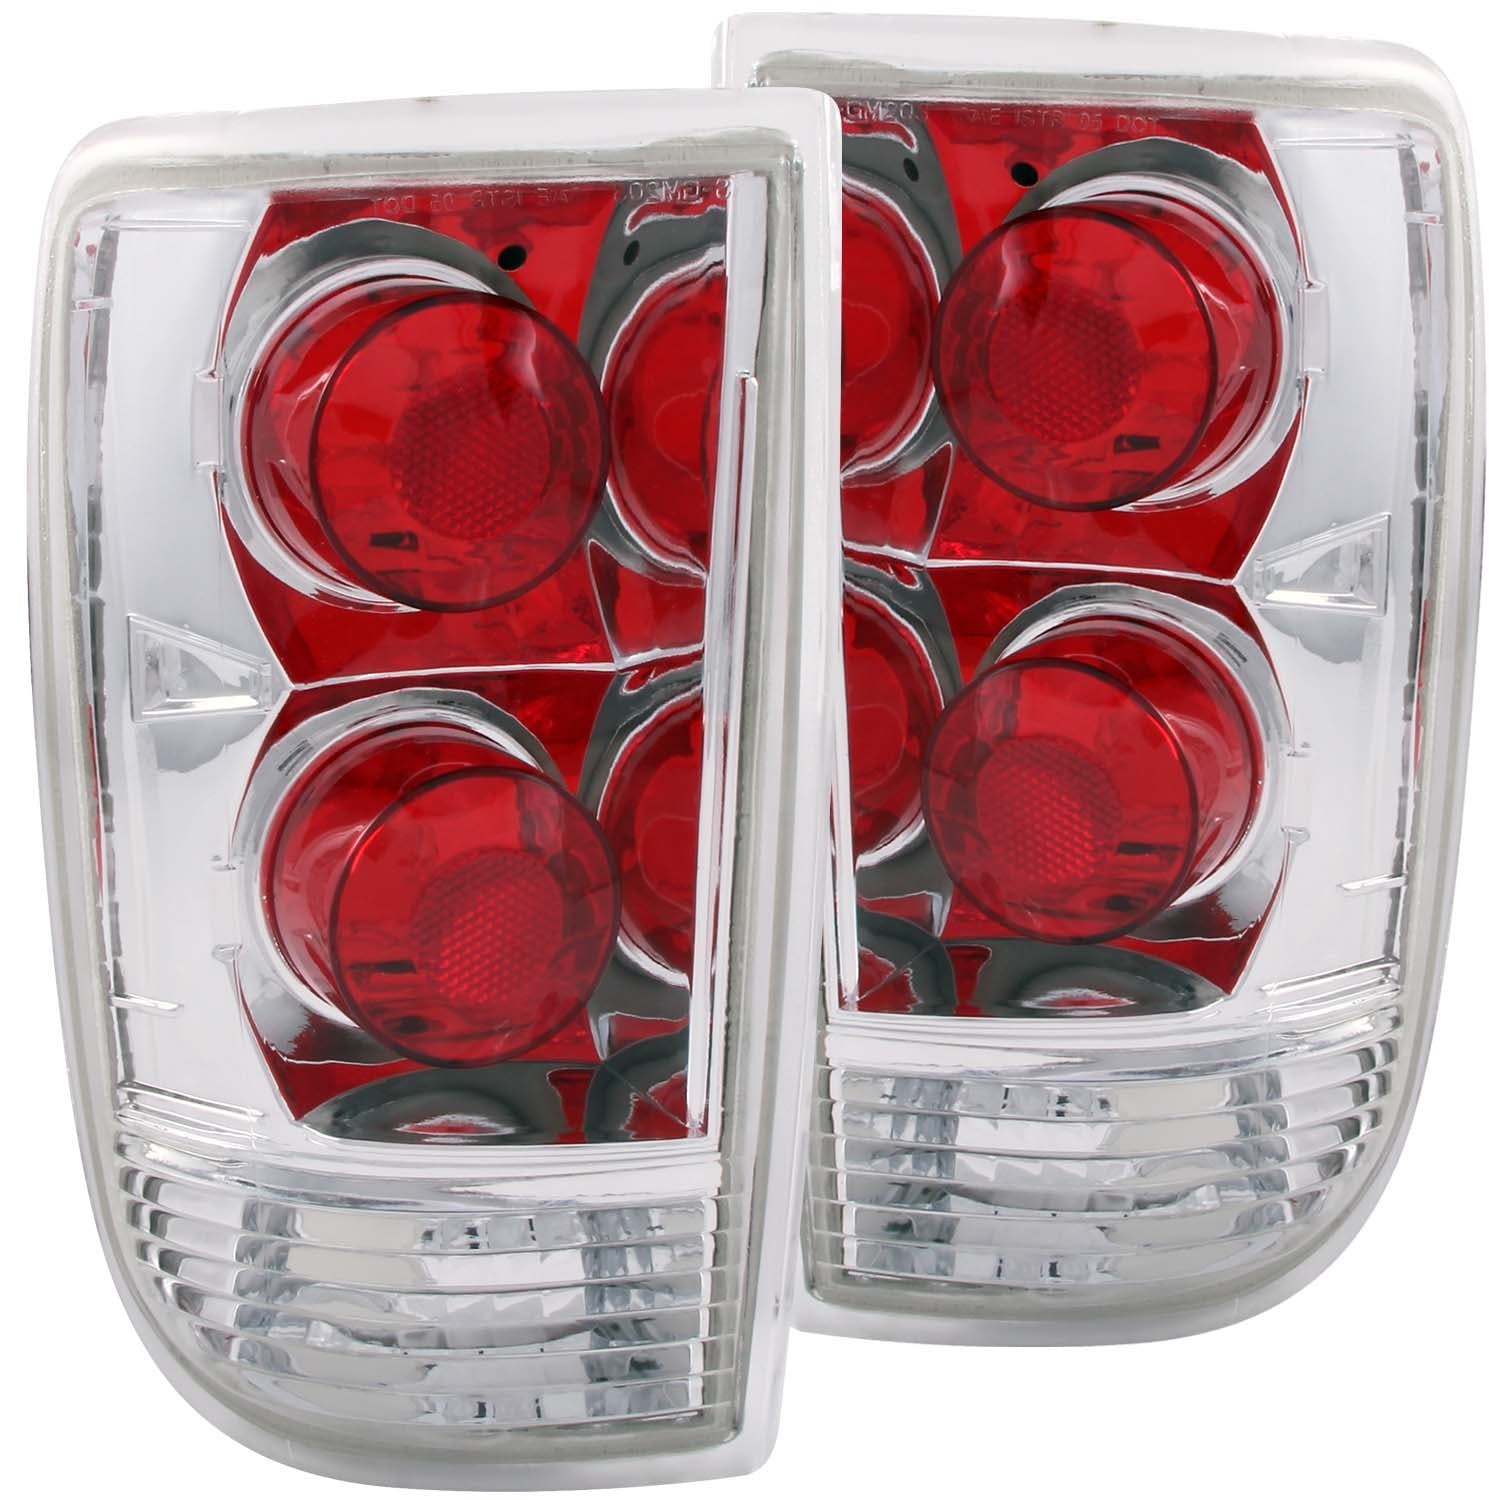 AnzoUSA 211004 Taillights Chrome